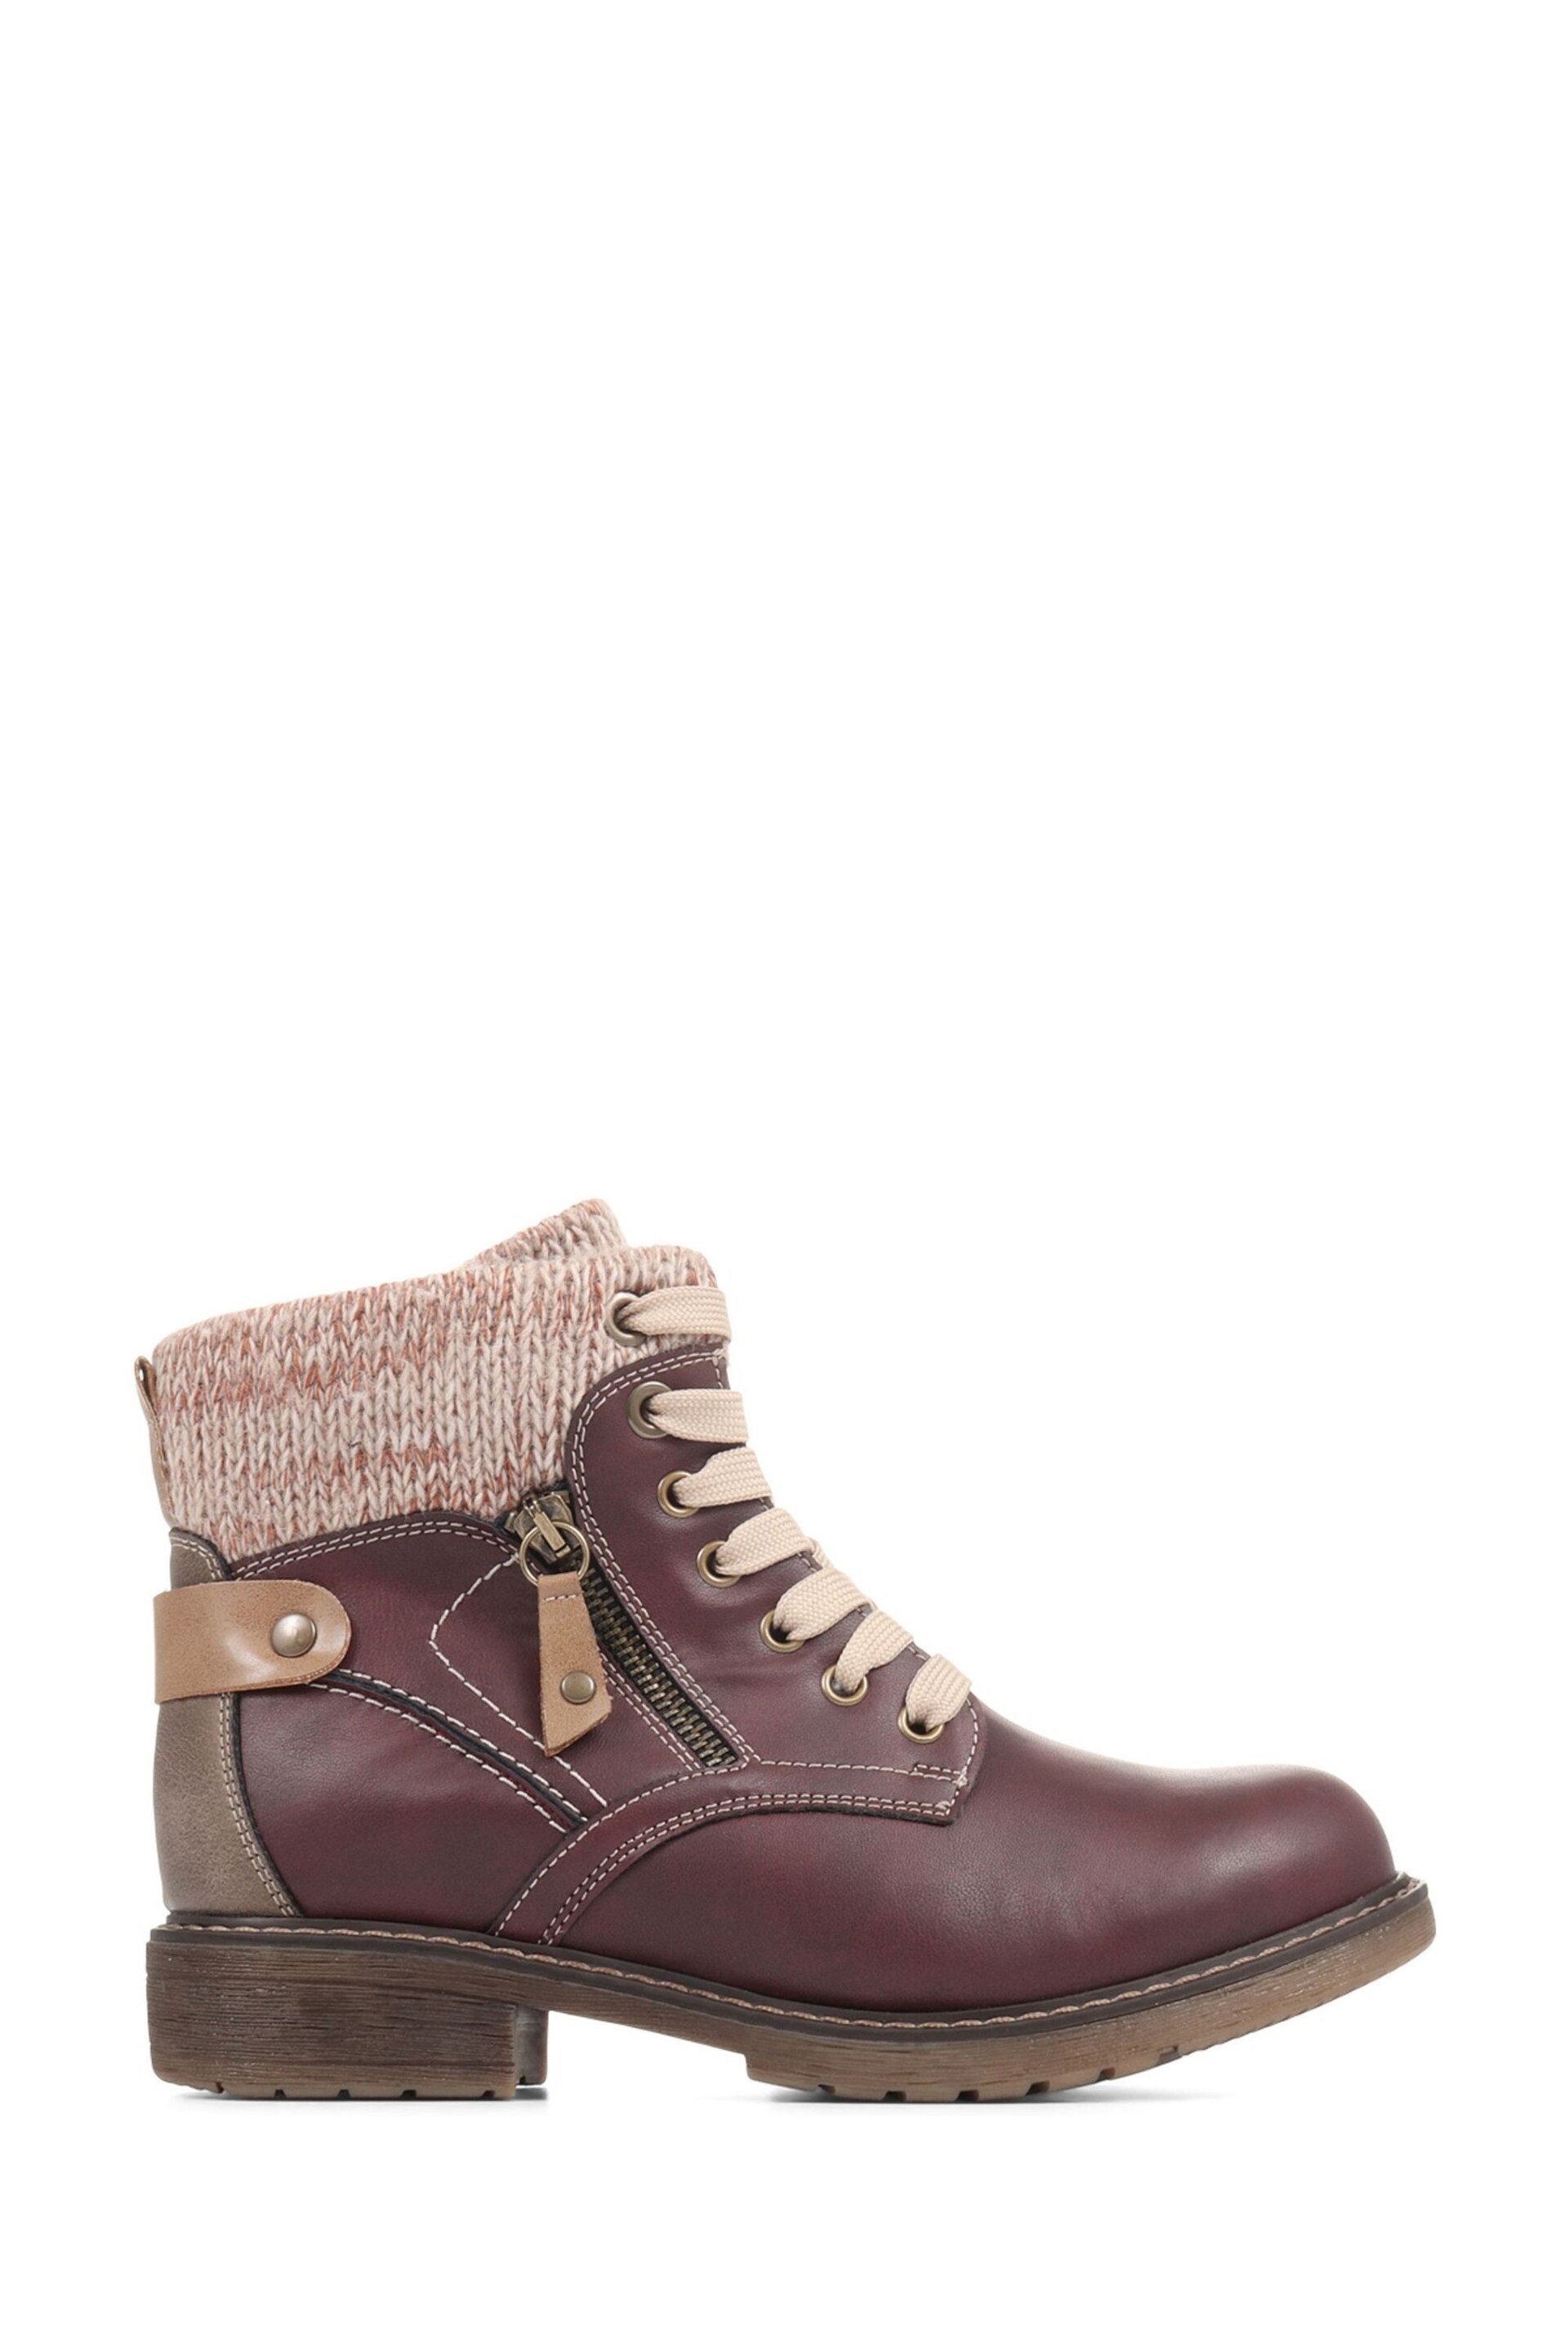 Pavers Brown Lace-Up Ankle Boots - Image 1 of 7